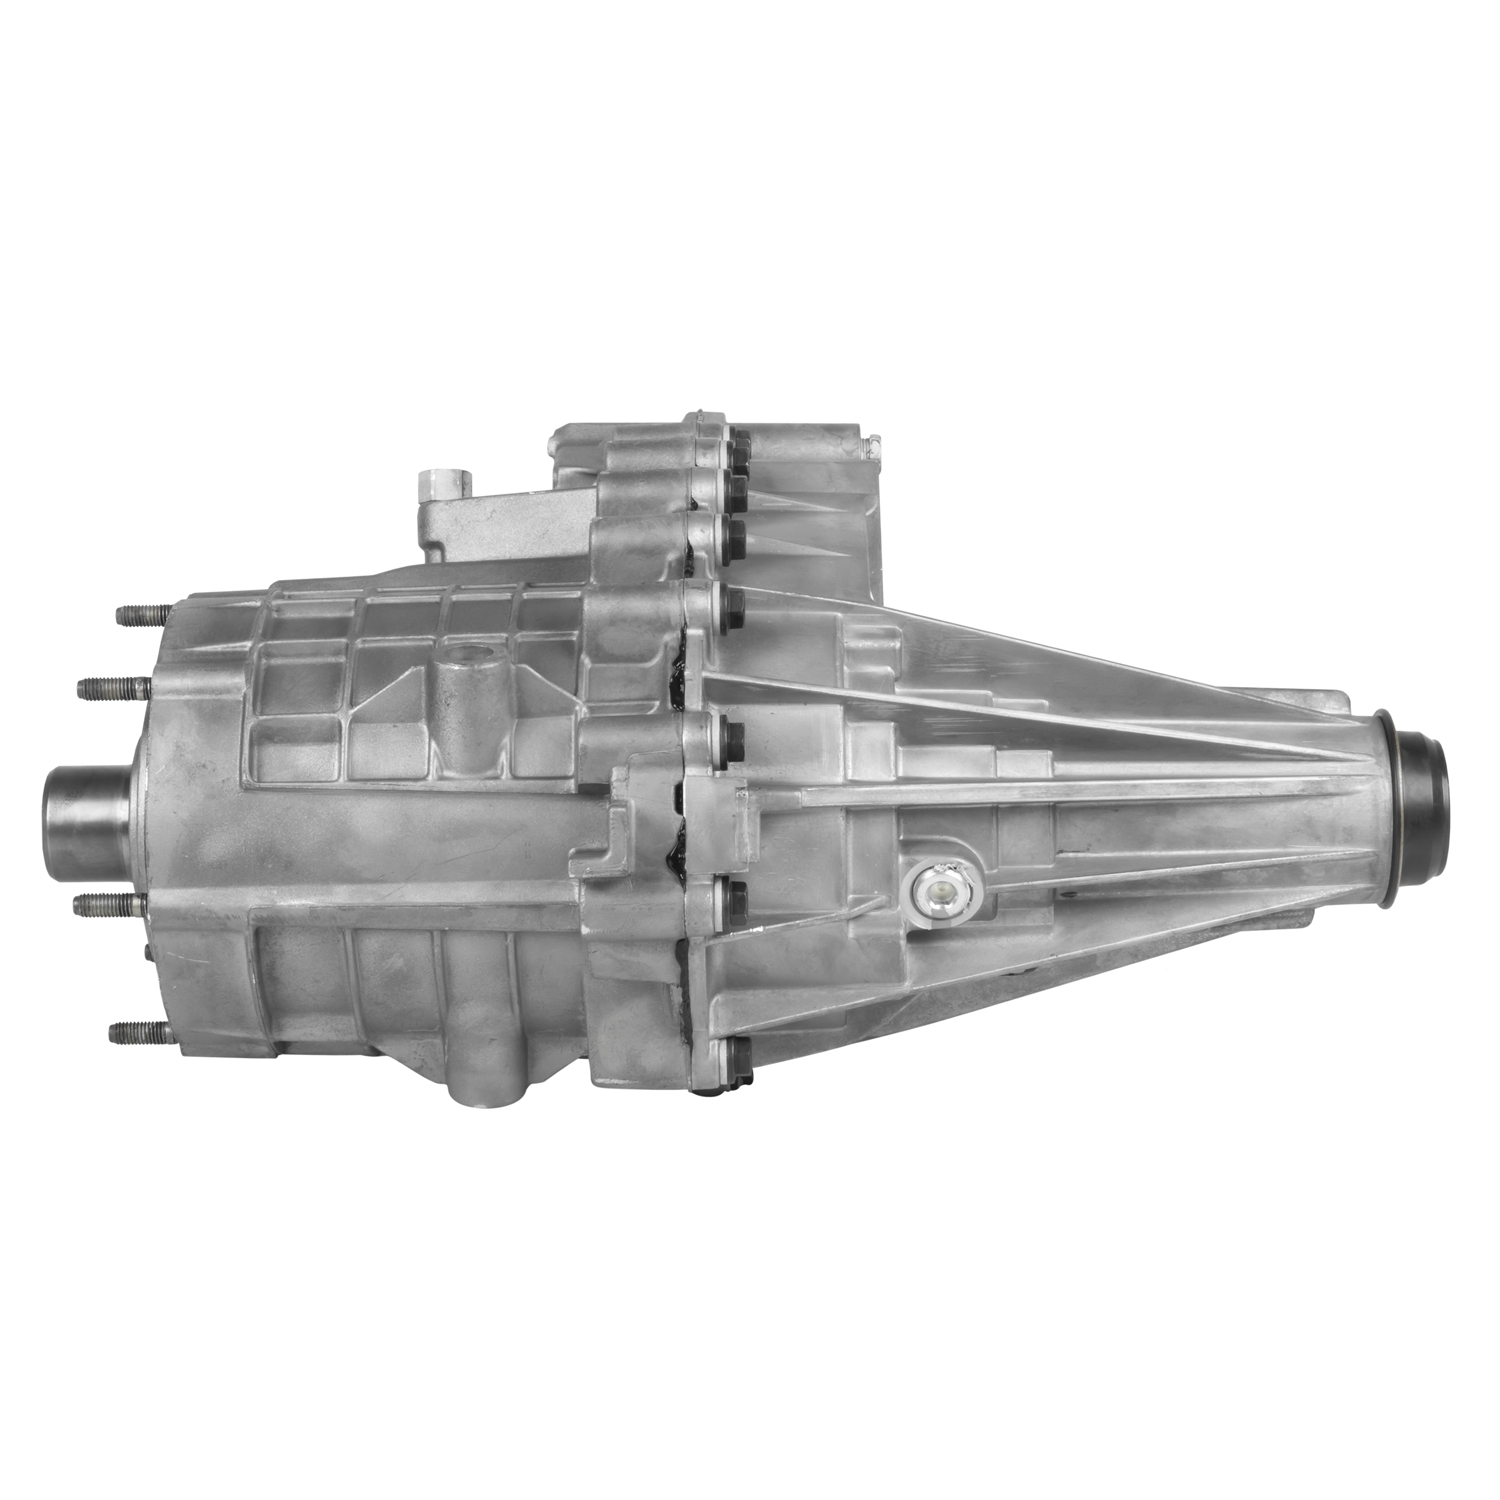 Zumbrota Remanufactured NP263 Transfer Case for 2001-2007 GM 2500/3500 Series